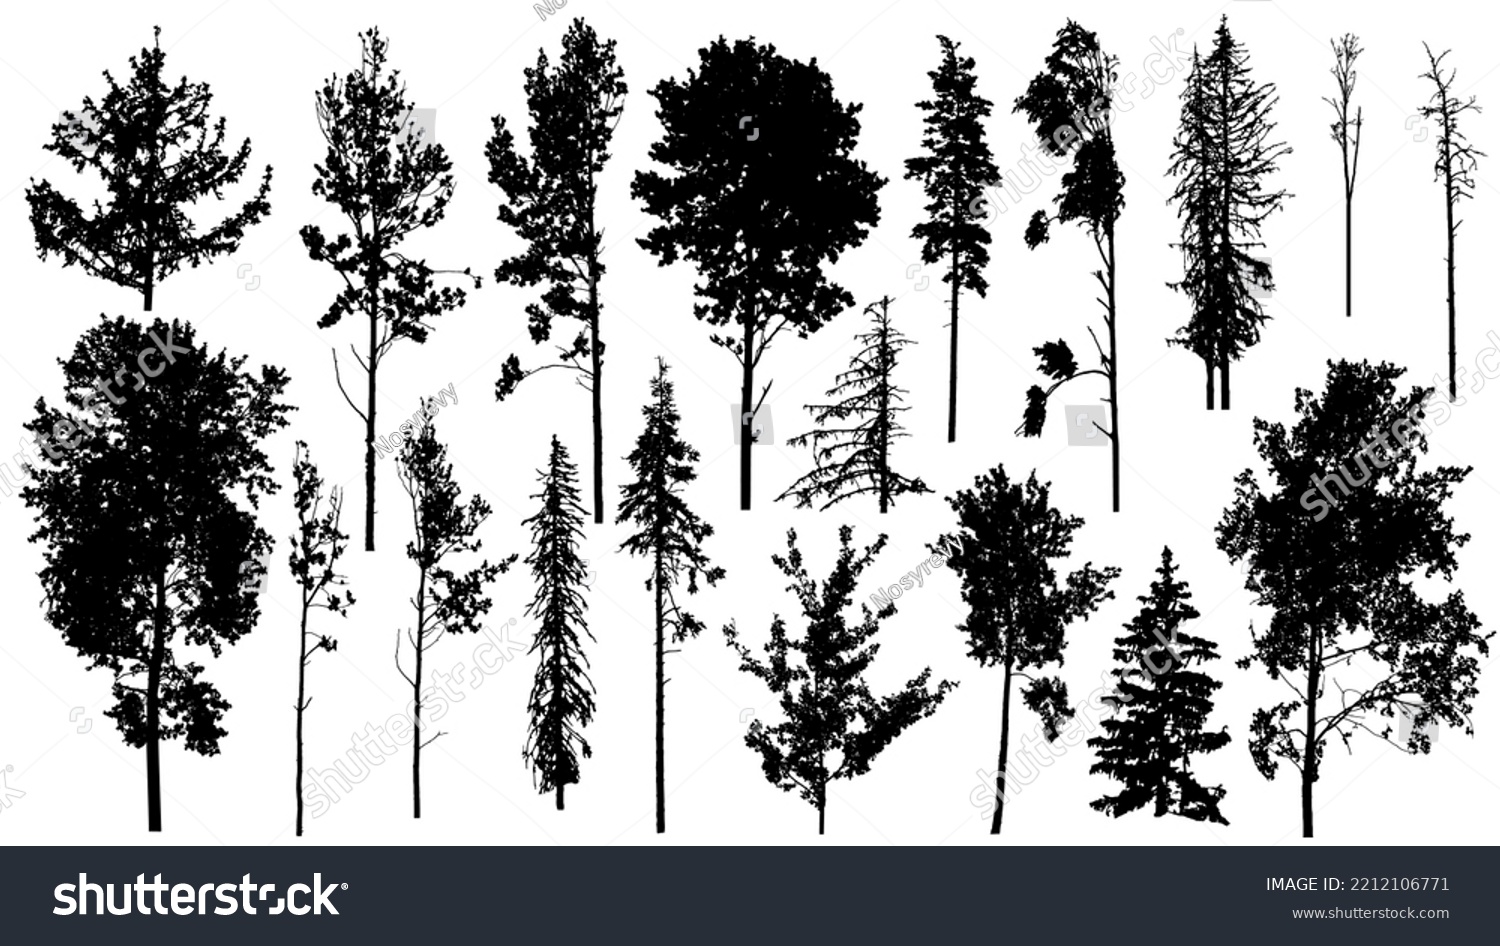 SVG of Coniferous and deciduous forest trees, bare trees. Set of silhouettes. Vector illustration svg